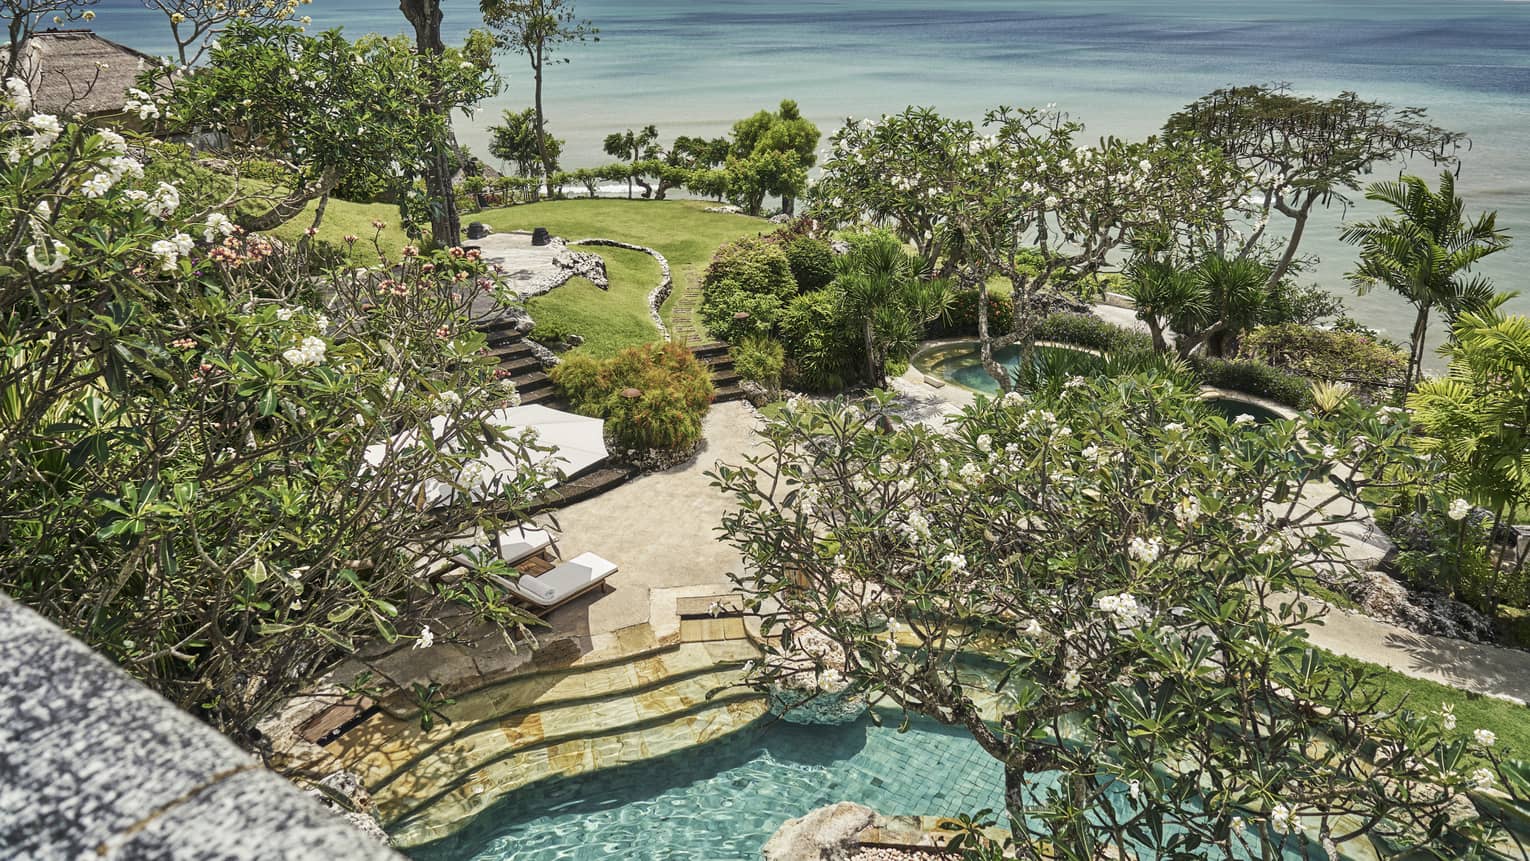 Aerial view through trees of resort stone patio and steps to swimming pool, green lawn, trees and blue ocean